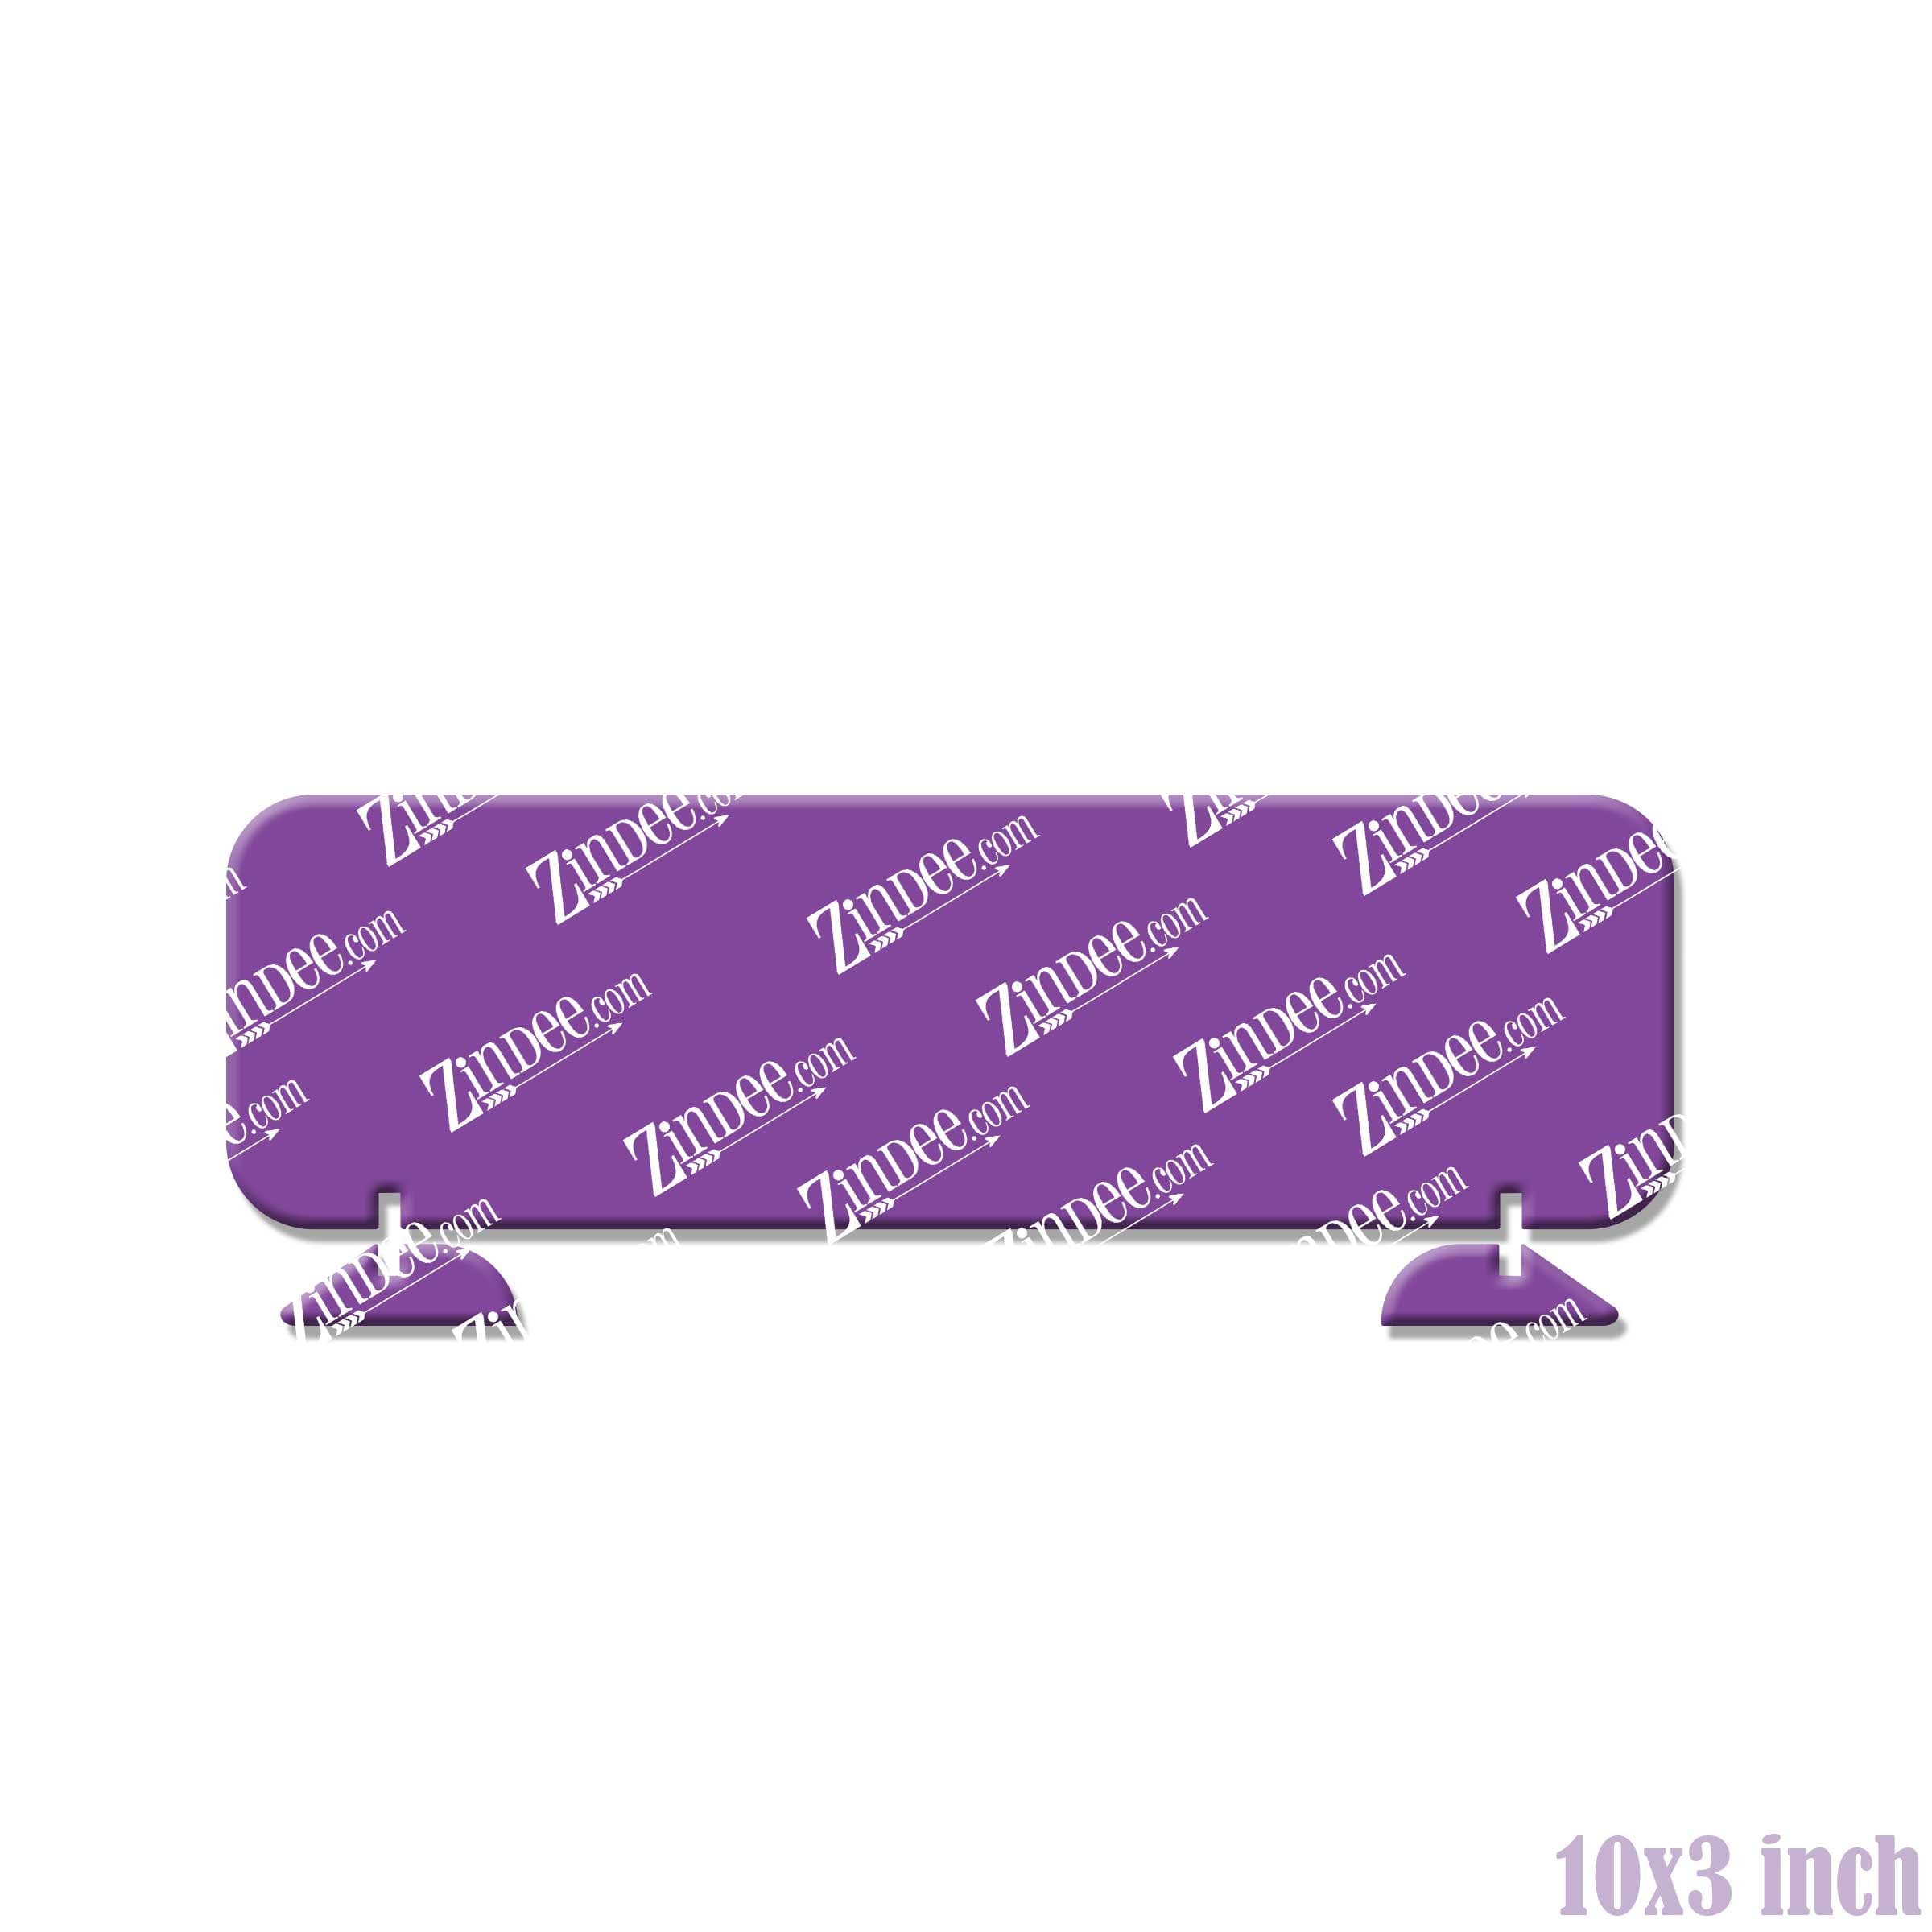 *CUSTOM* Stanley Cup Name Plate to Match LAVENDER